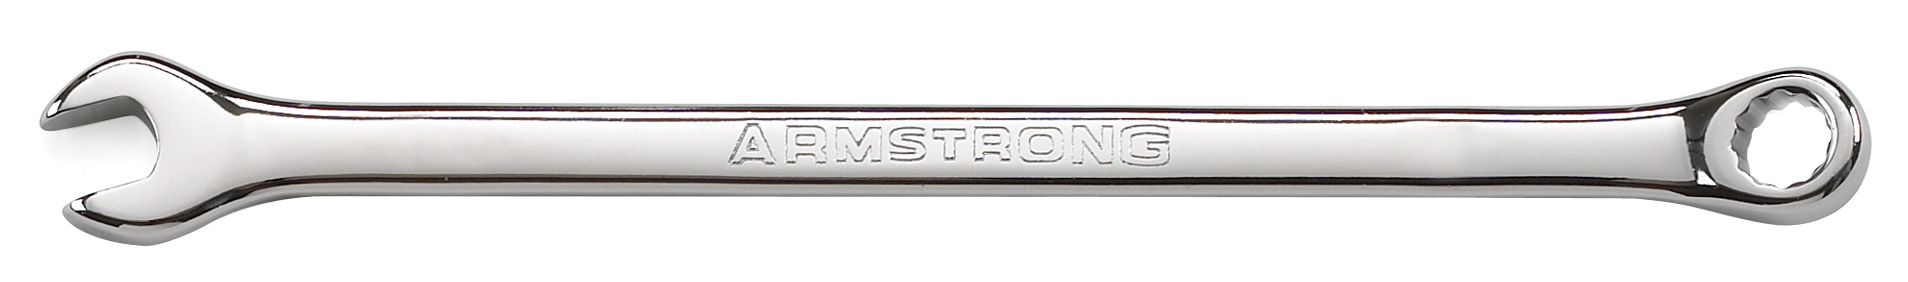 Armstrong 22 mm 12 pt. Full Polish Long Combination Wrench